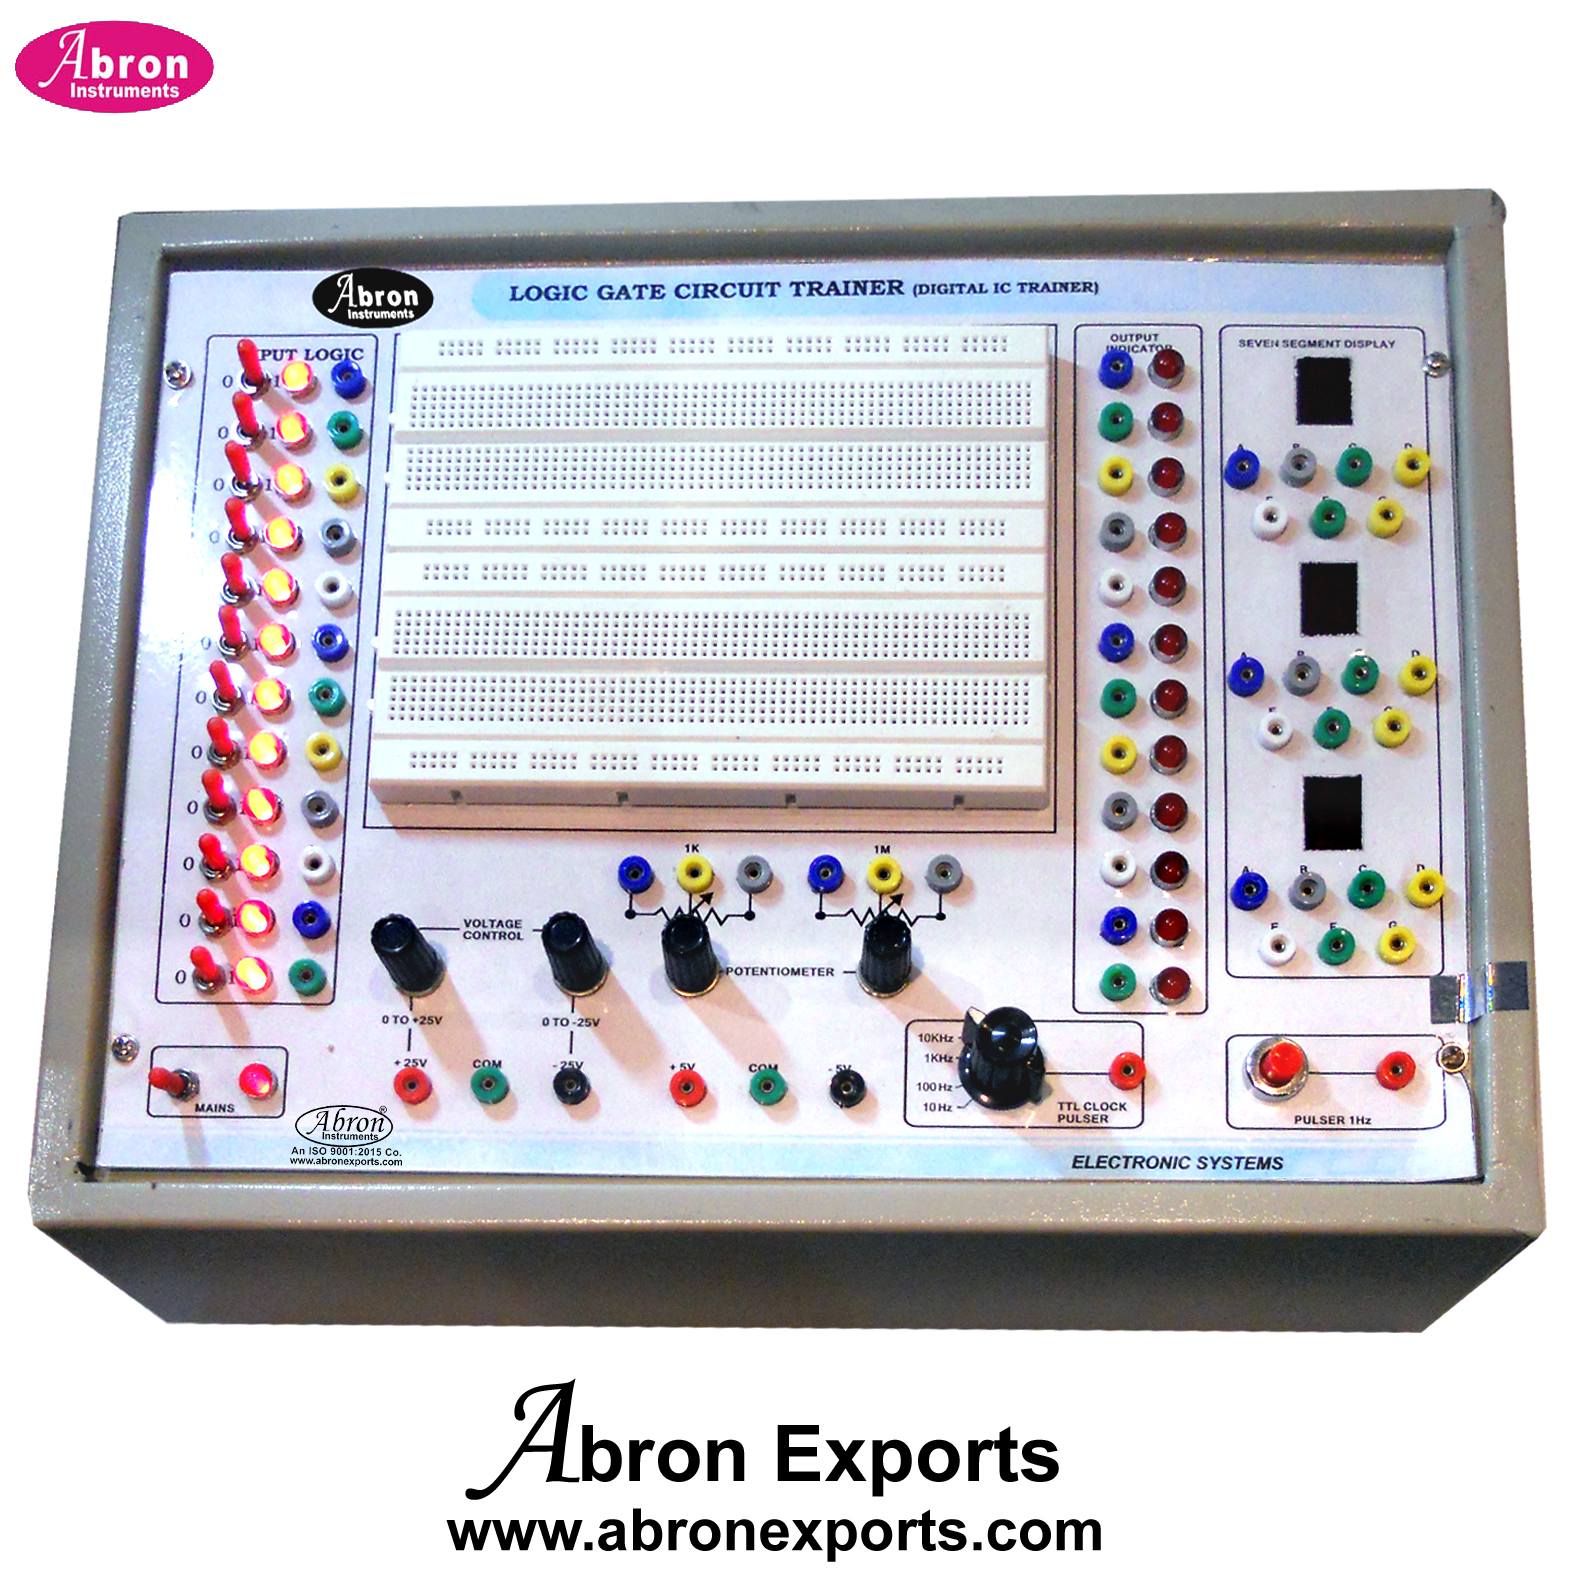 Bread Board With Power Supply +5VDC +12VDC Logic Gates Trainer With Terminals Bread Board in Box AE-1300L